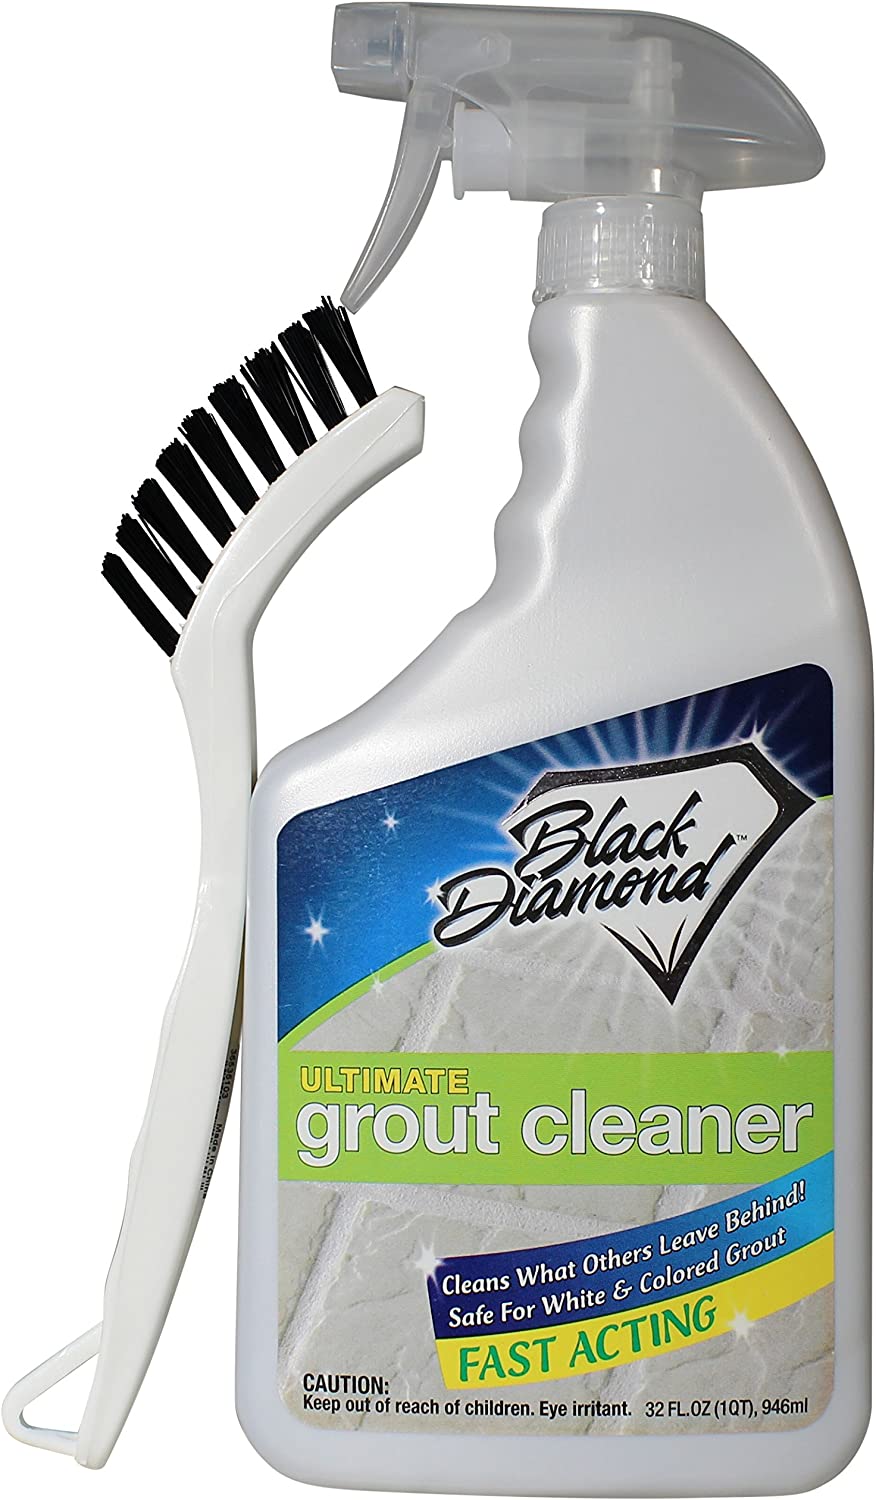 Black Diamond Stoneworks ULTIMATE GROUT CLEANER: Best [...]